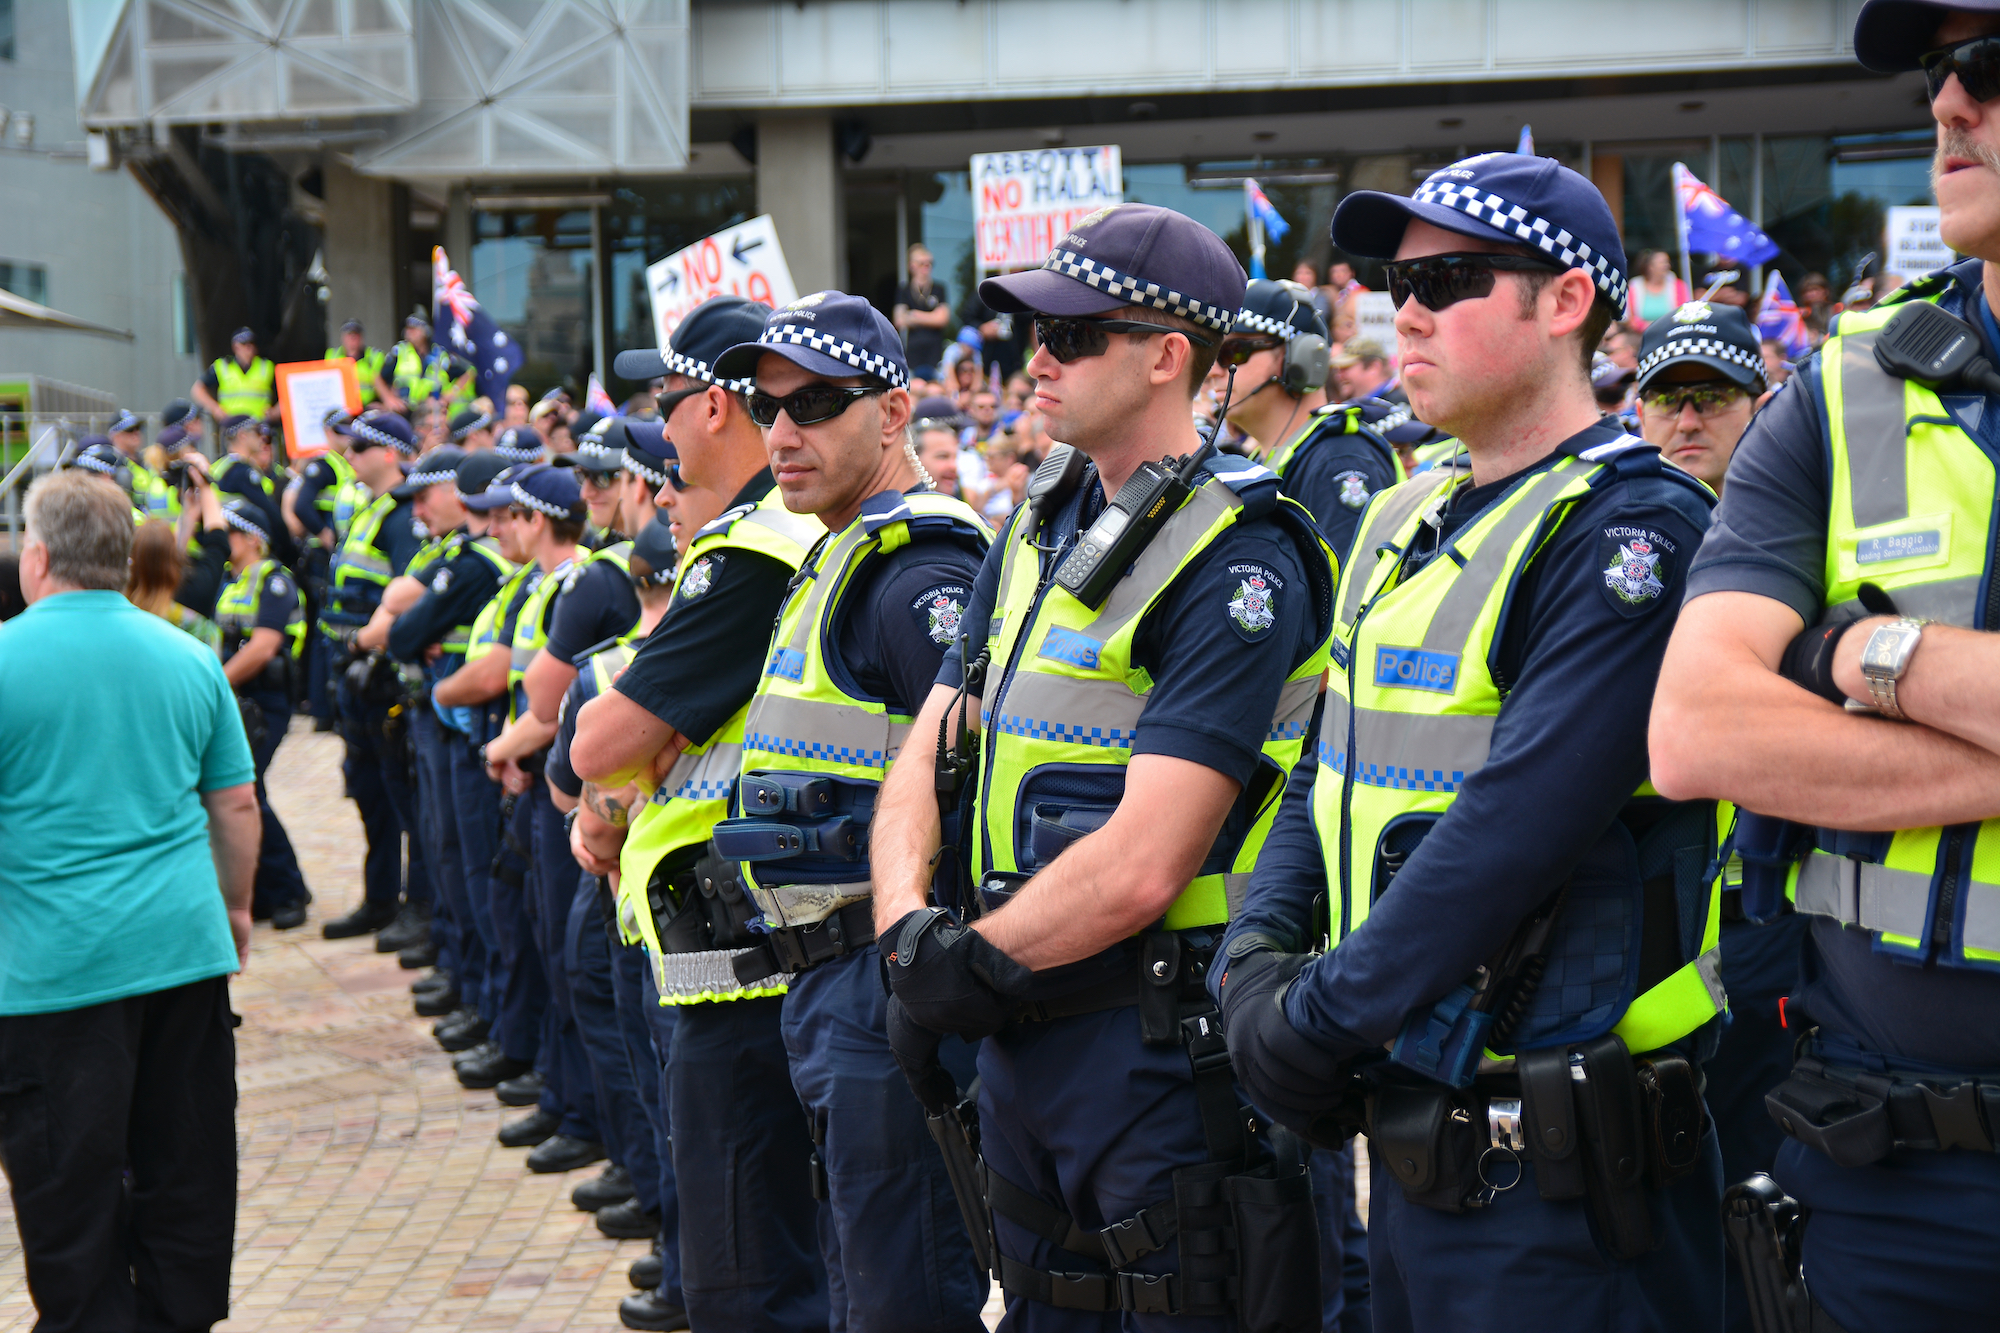 Aussie Cops Arent Happy about Having to Cover up Their Tattoos